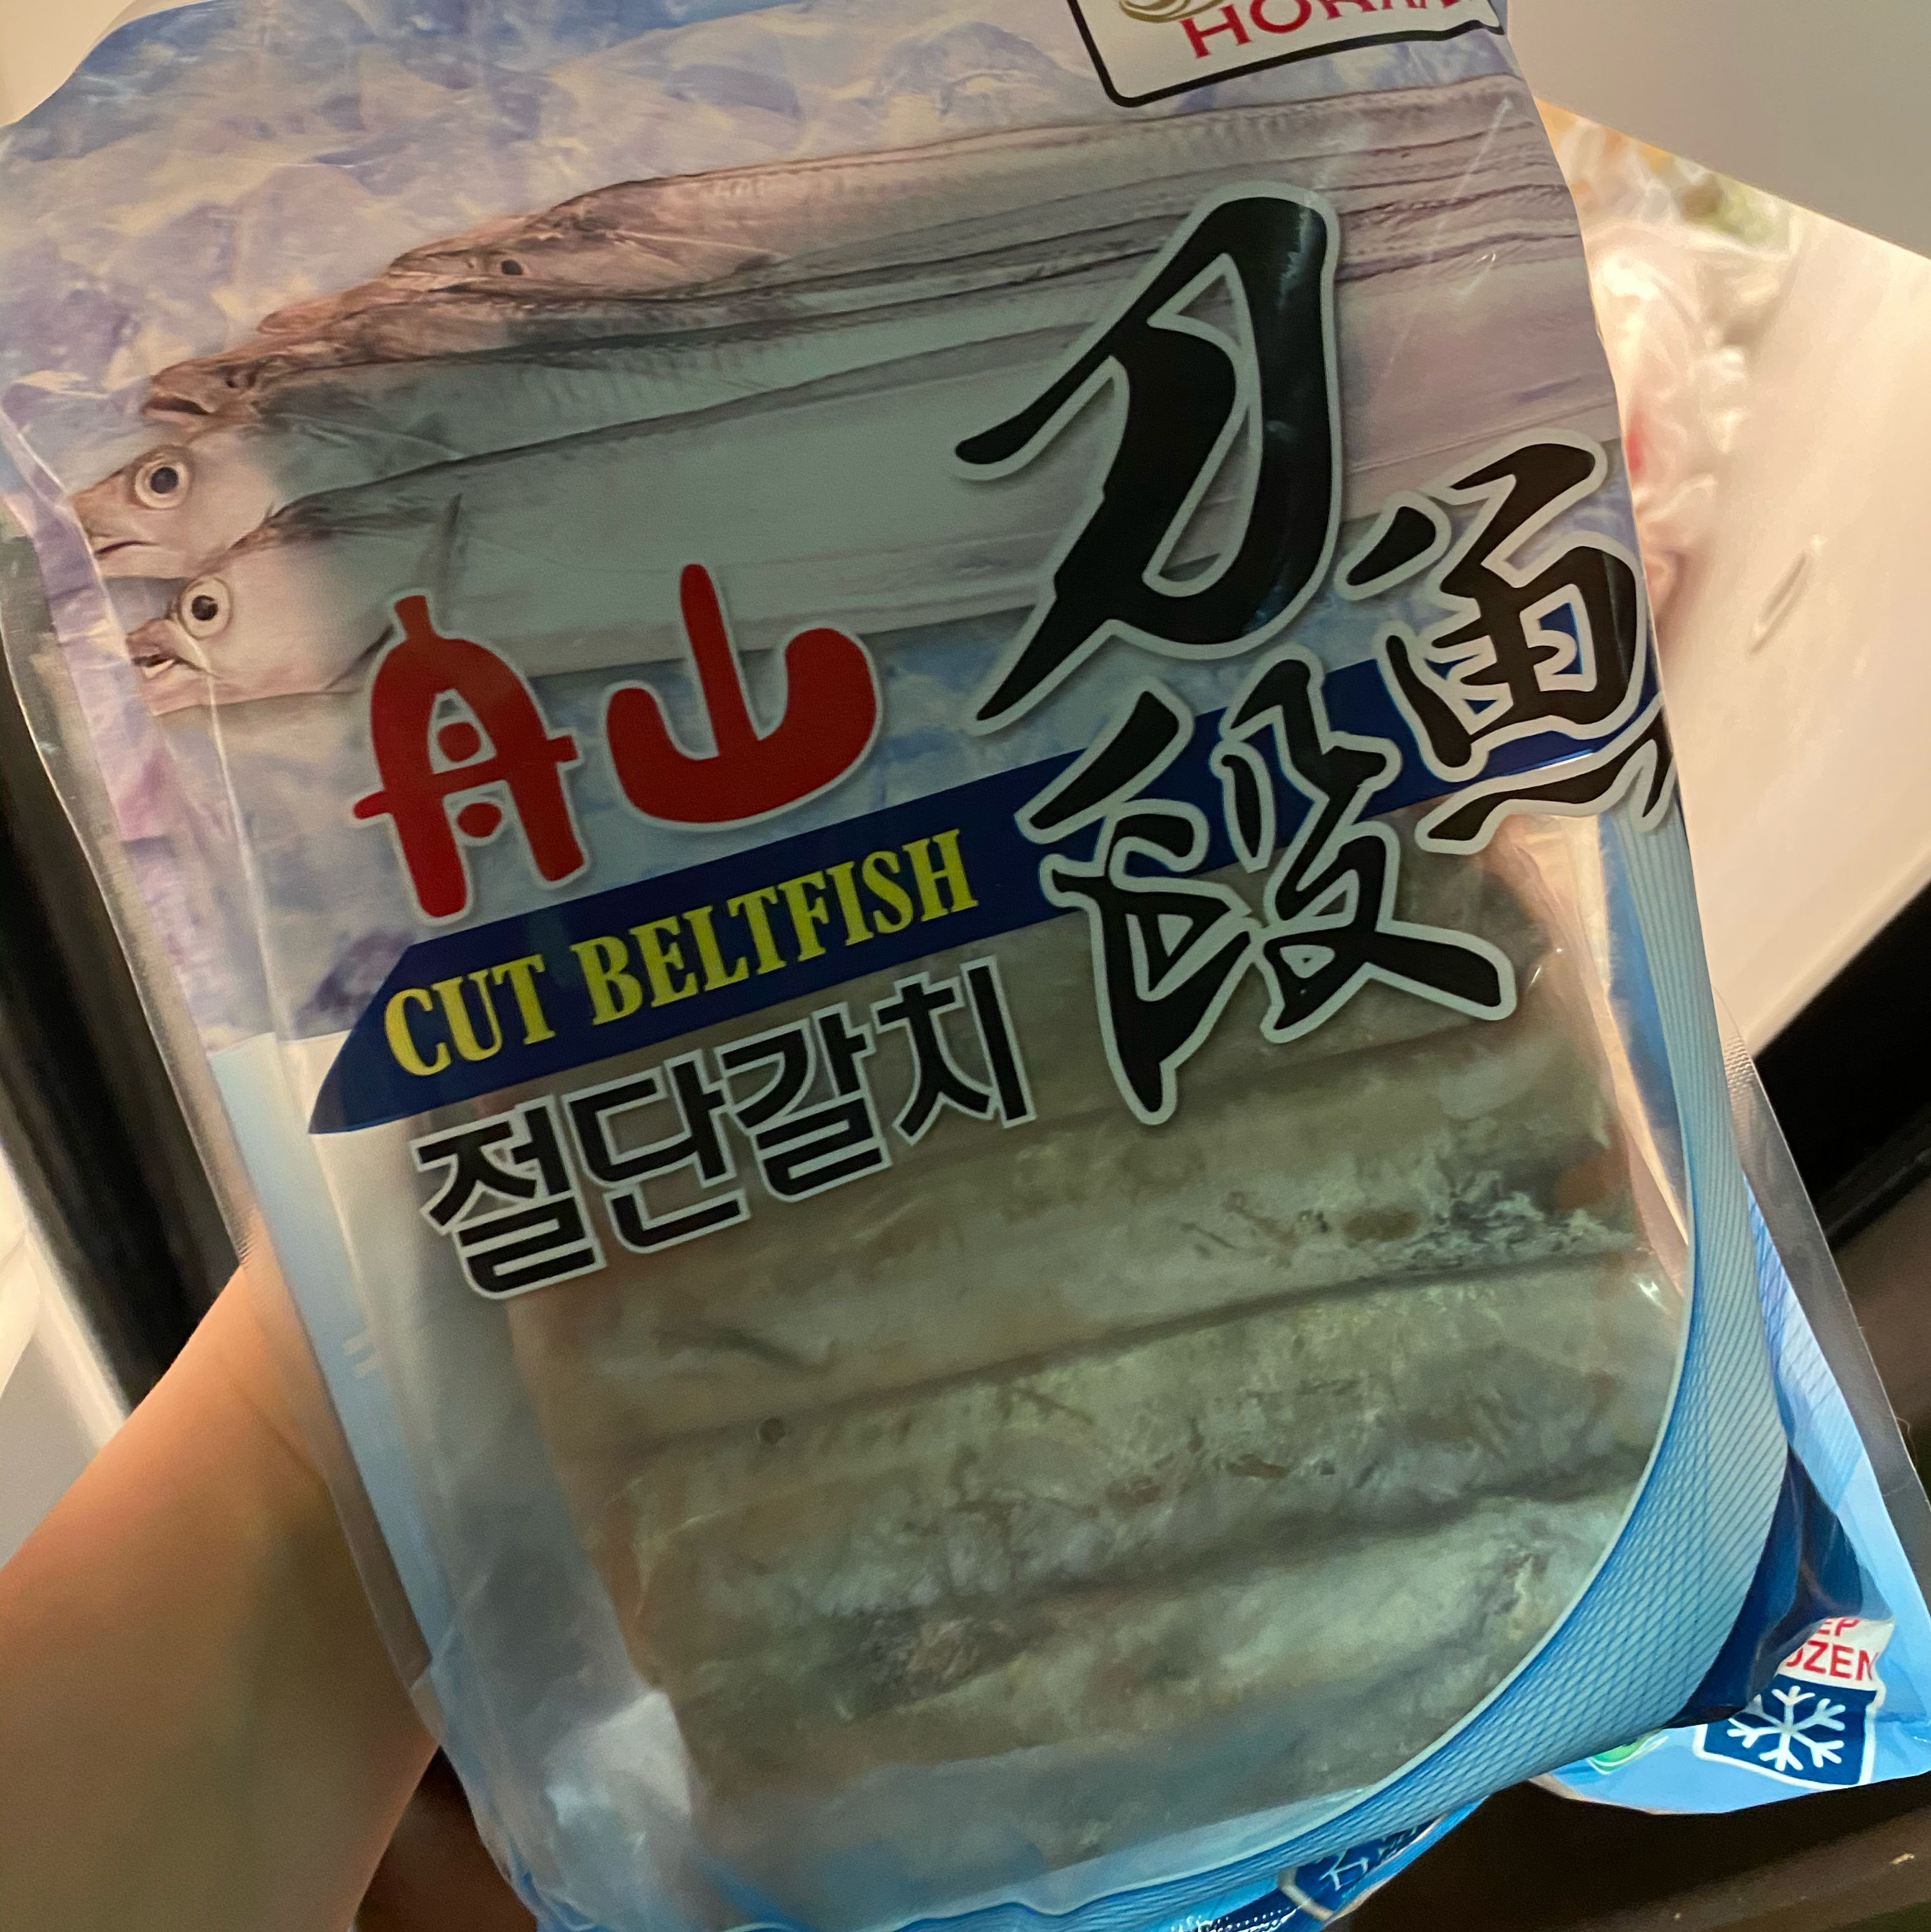 Defrost beltfish or use freshly bought, if available.